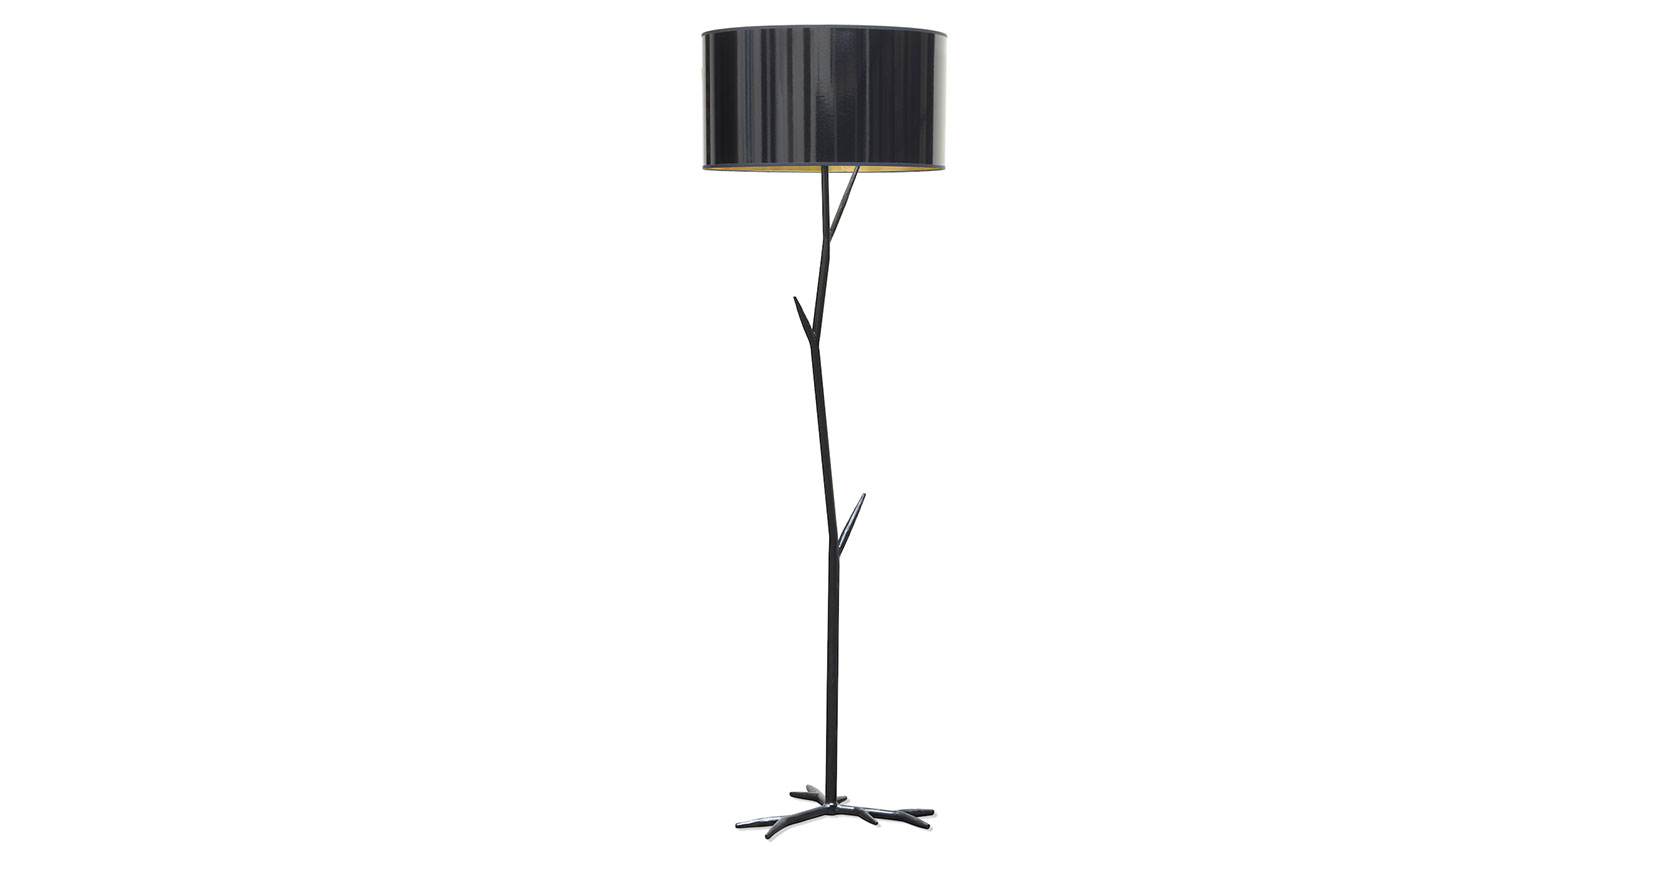 Eric Robin, floor lamp with a black wrought iron stem in the shape of branches, base in the shape of roots, round black lampshade